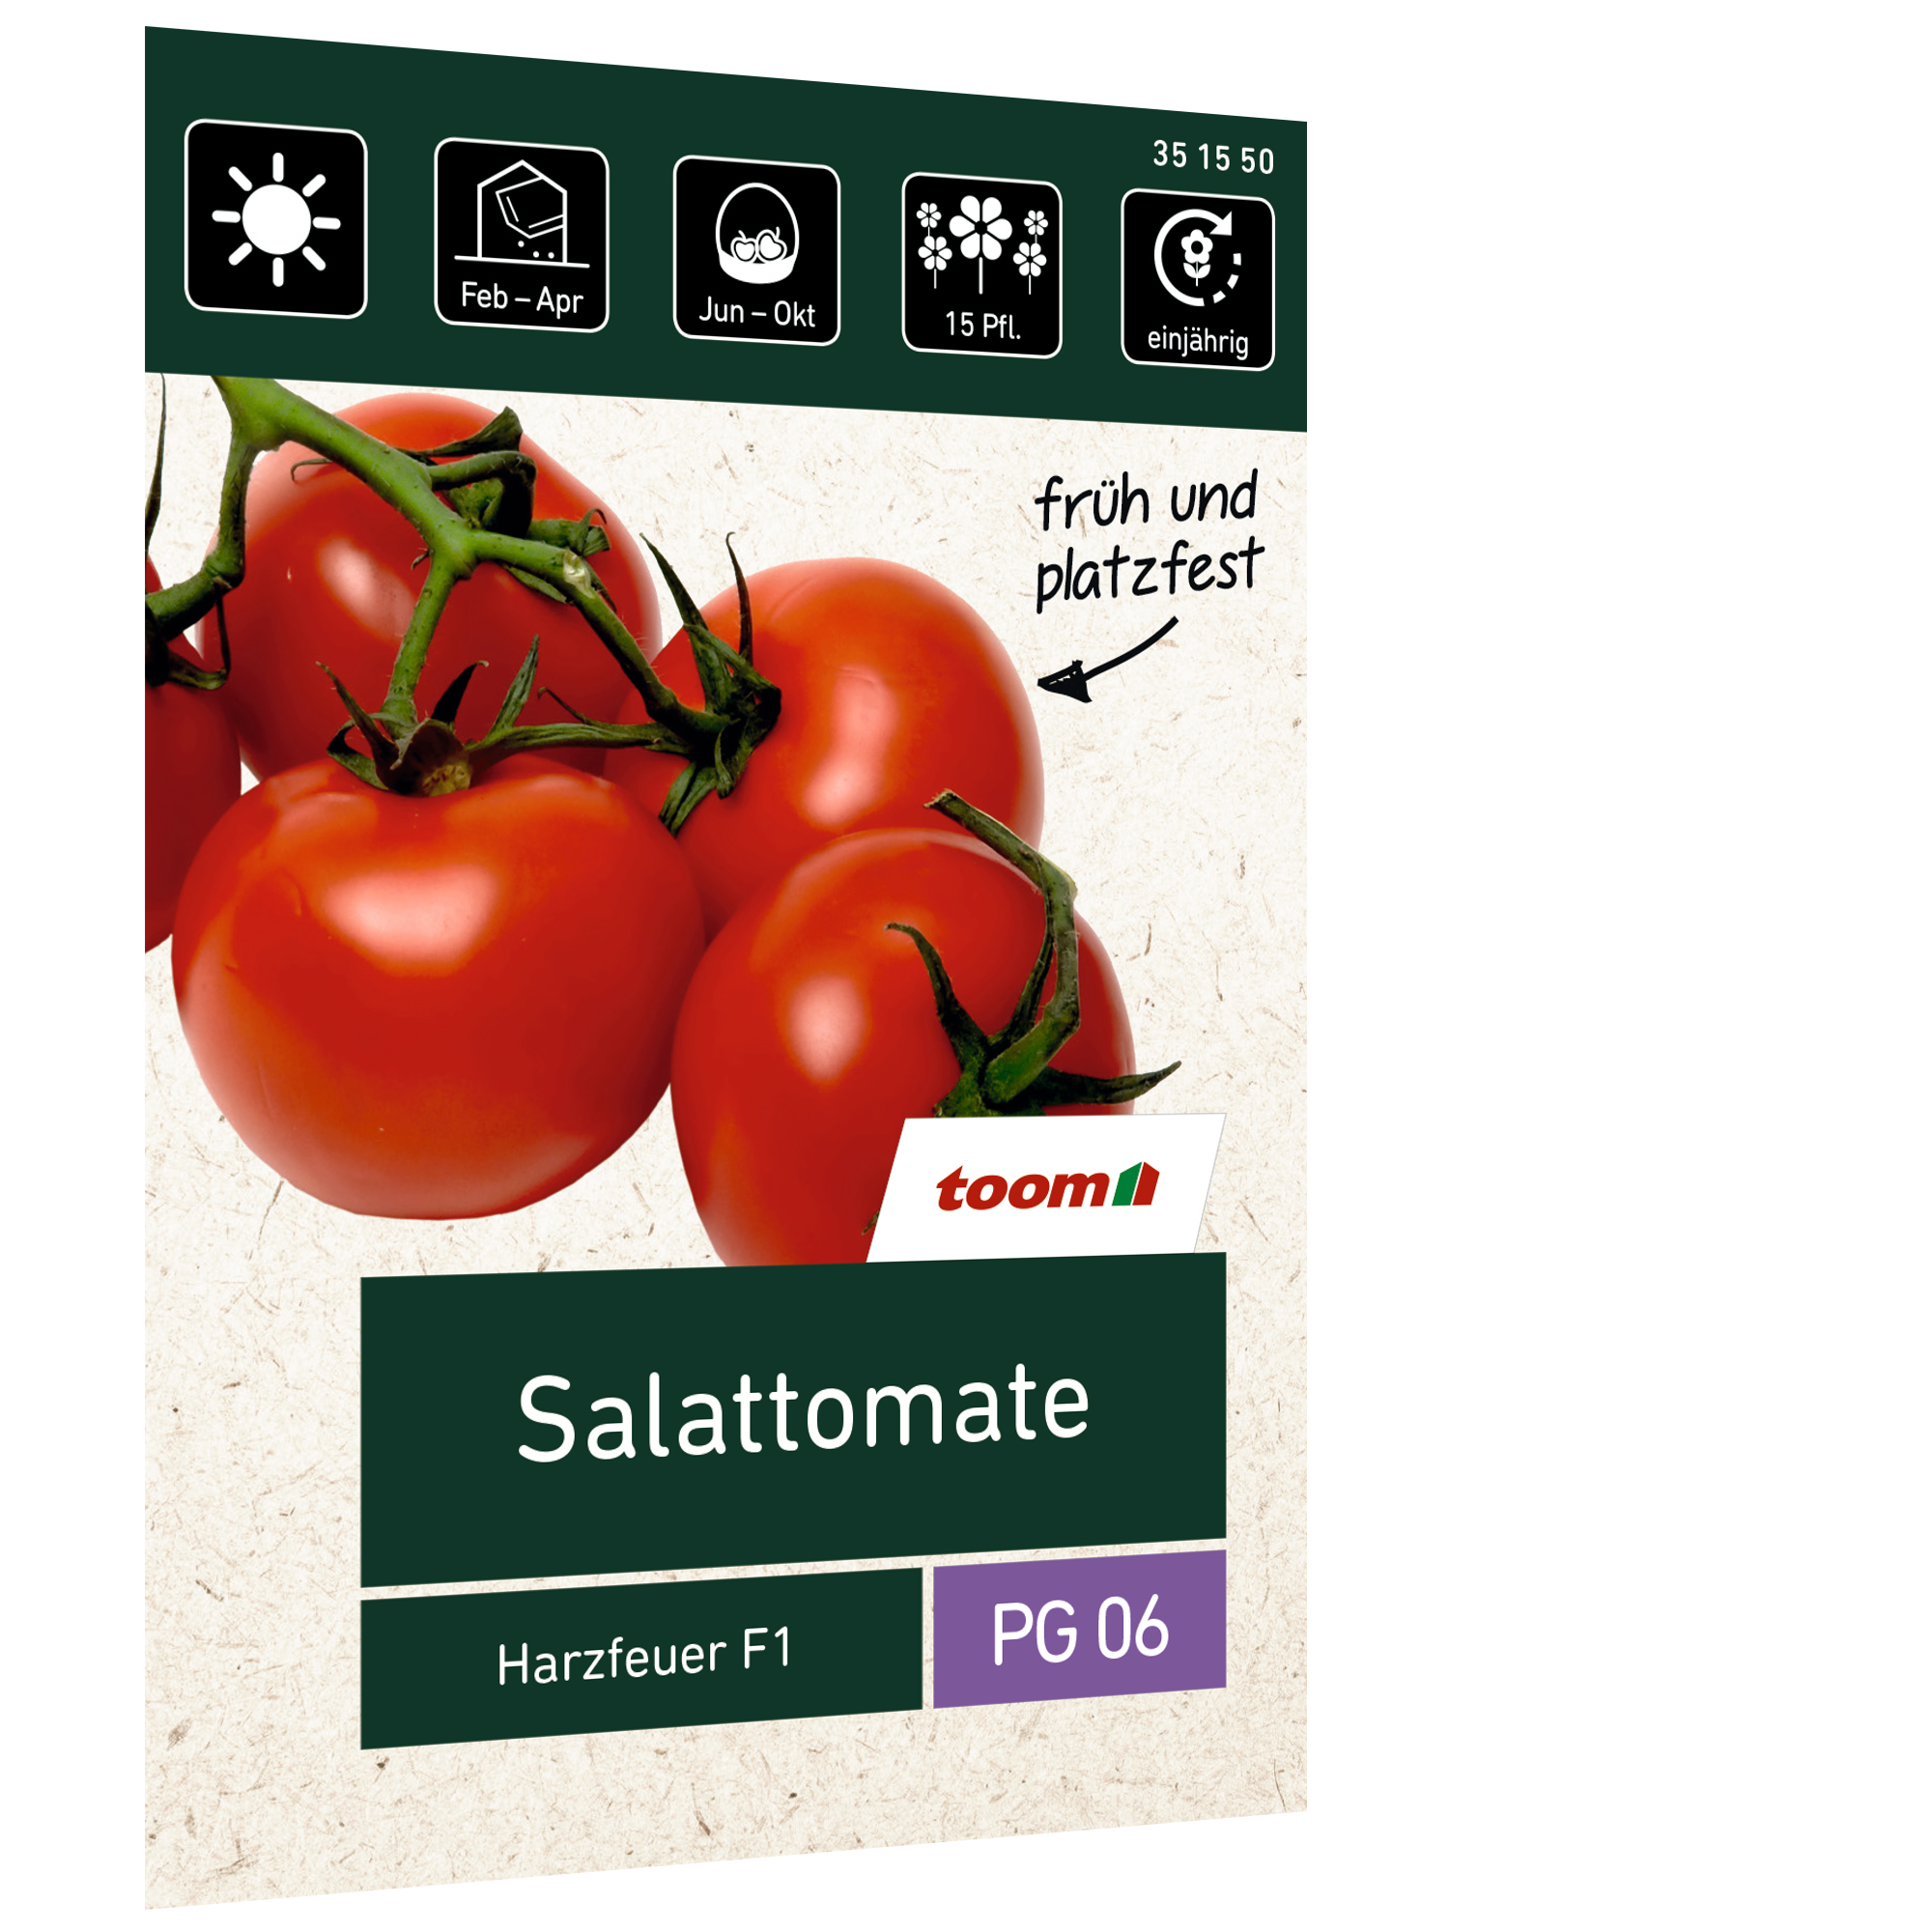 Salattomate 'Harzfeuer F1' + product picture